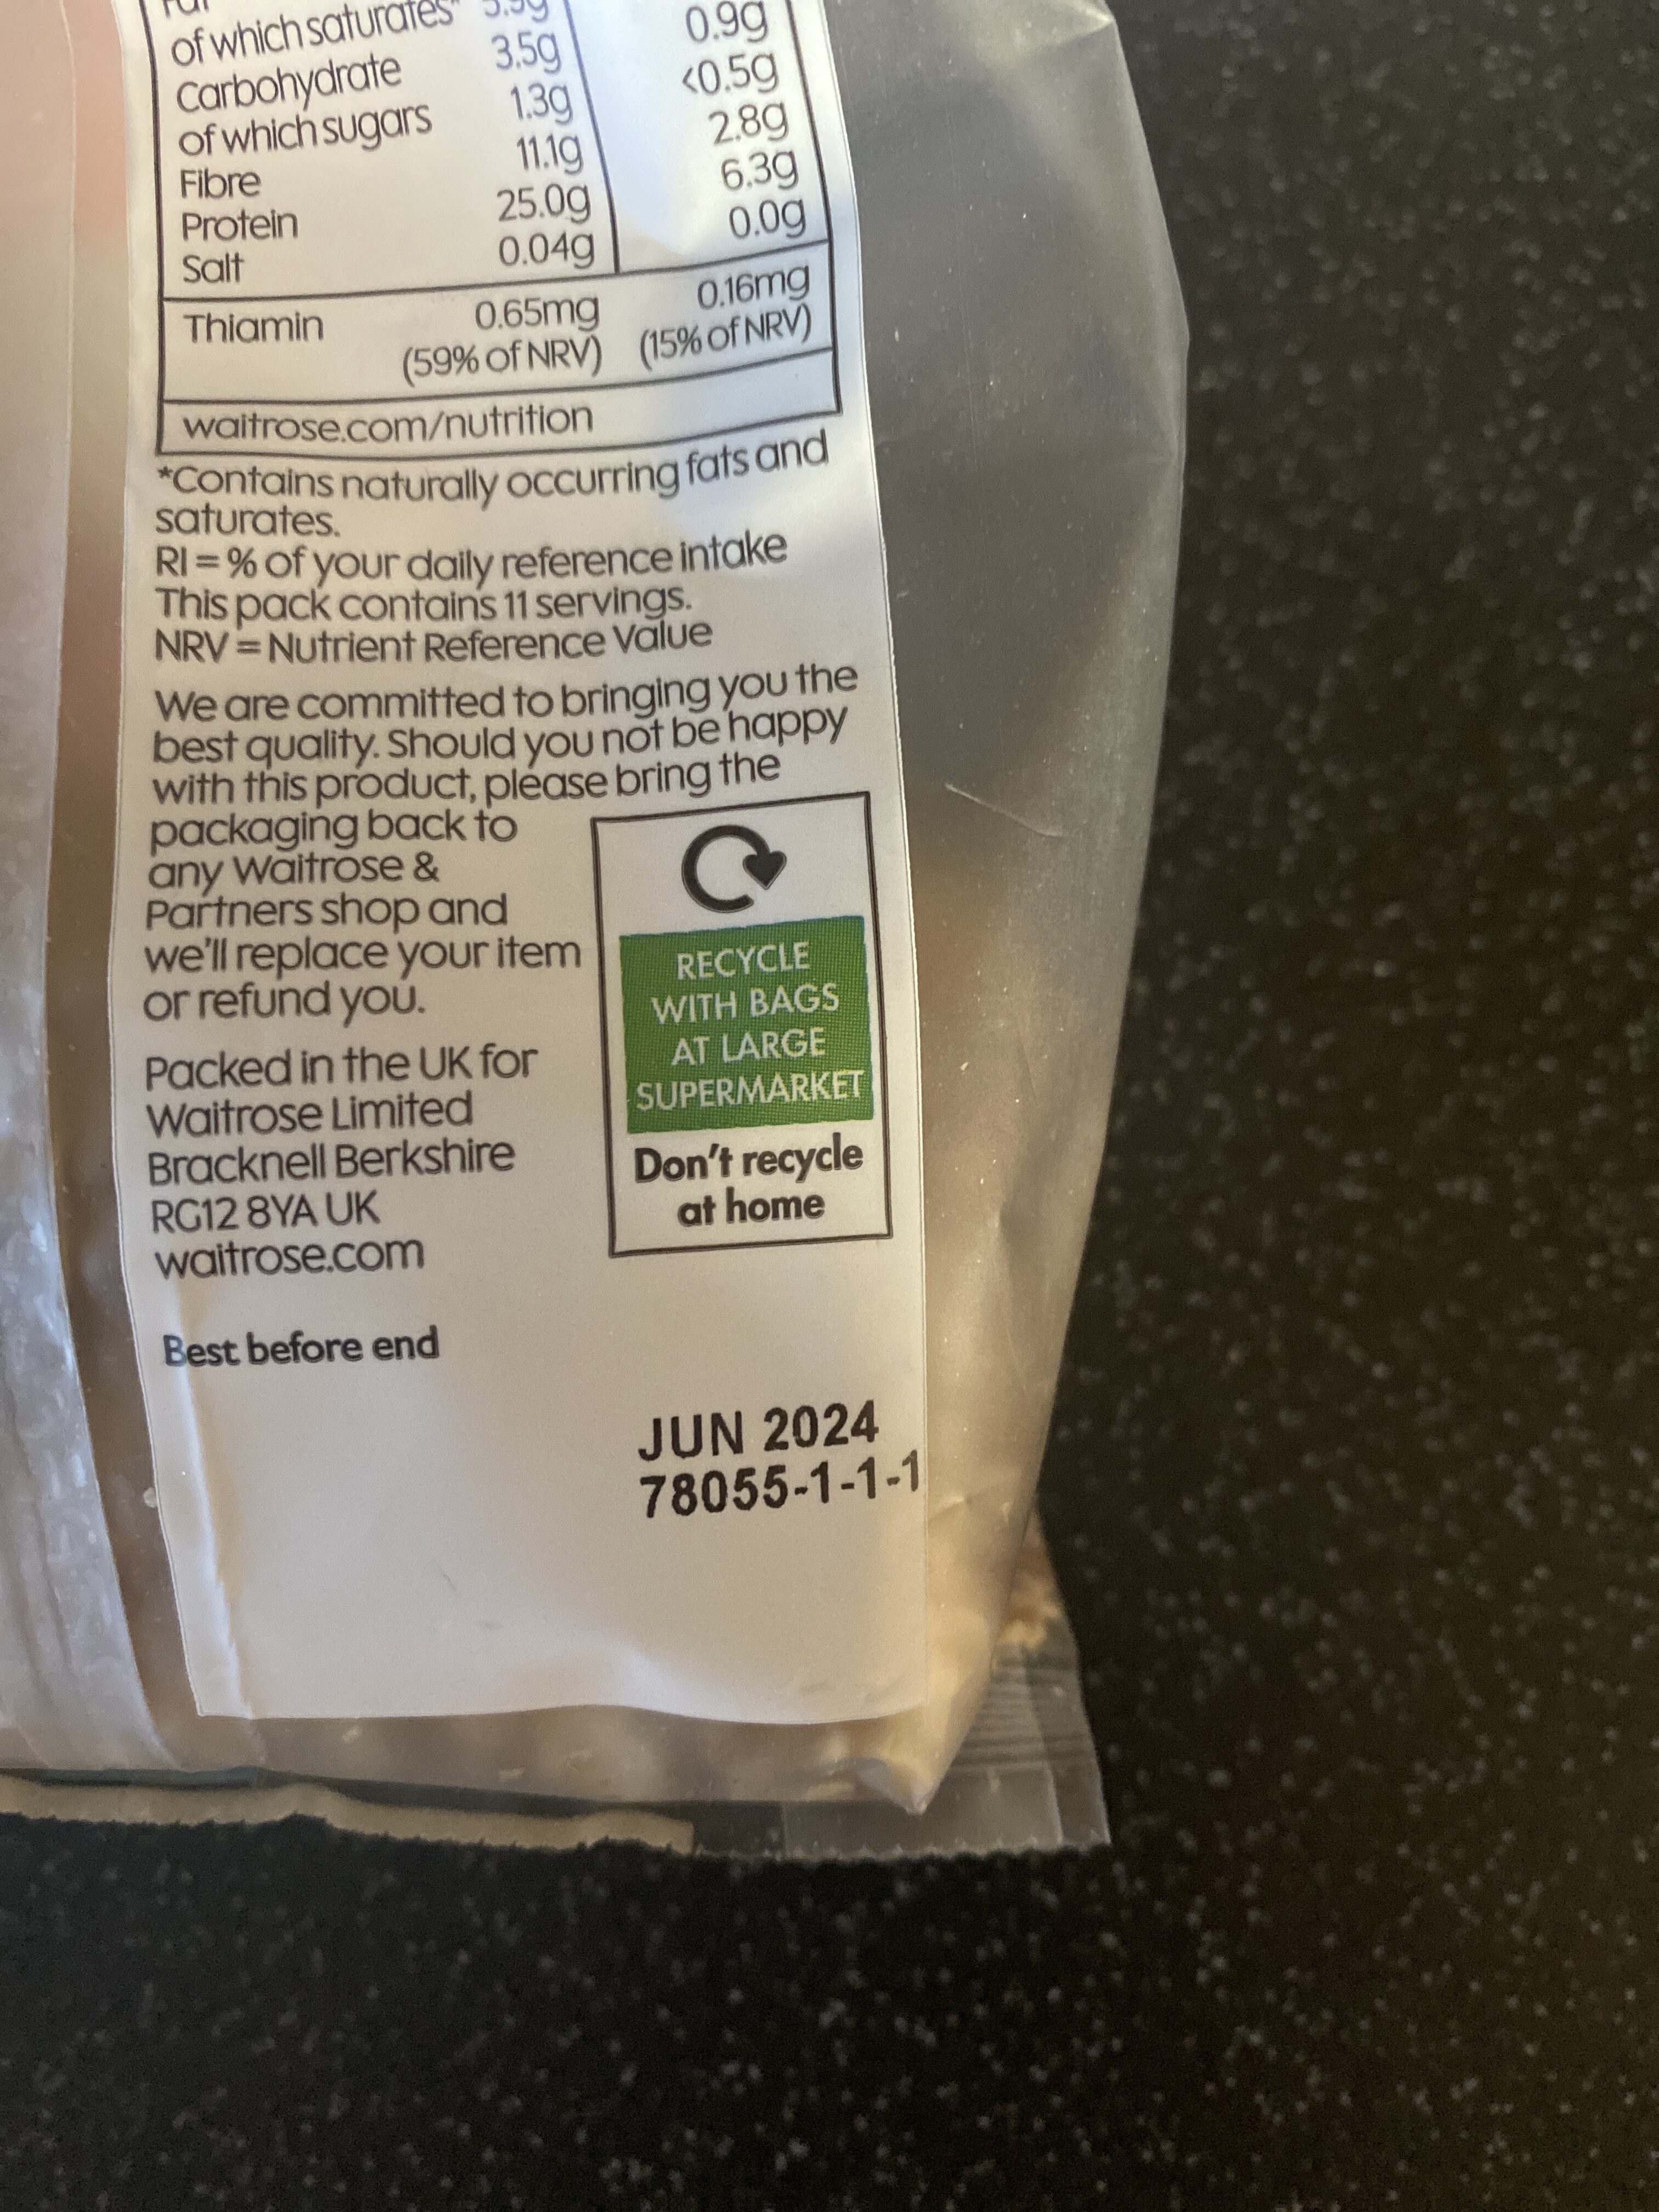 Mixed Seeds - Recycling instructions and/or packaging information